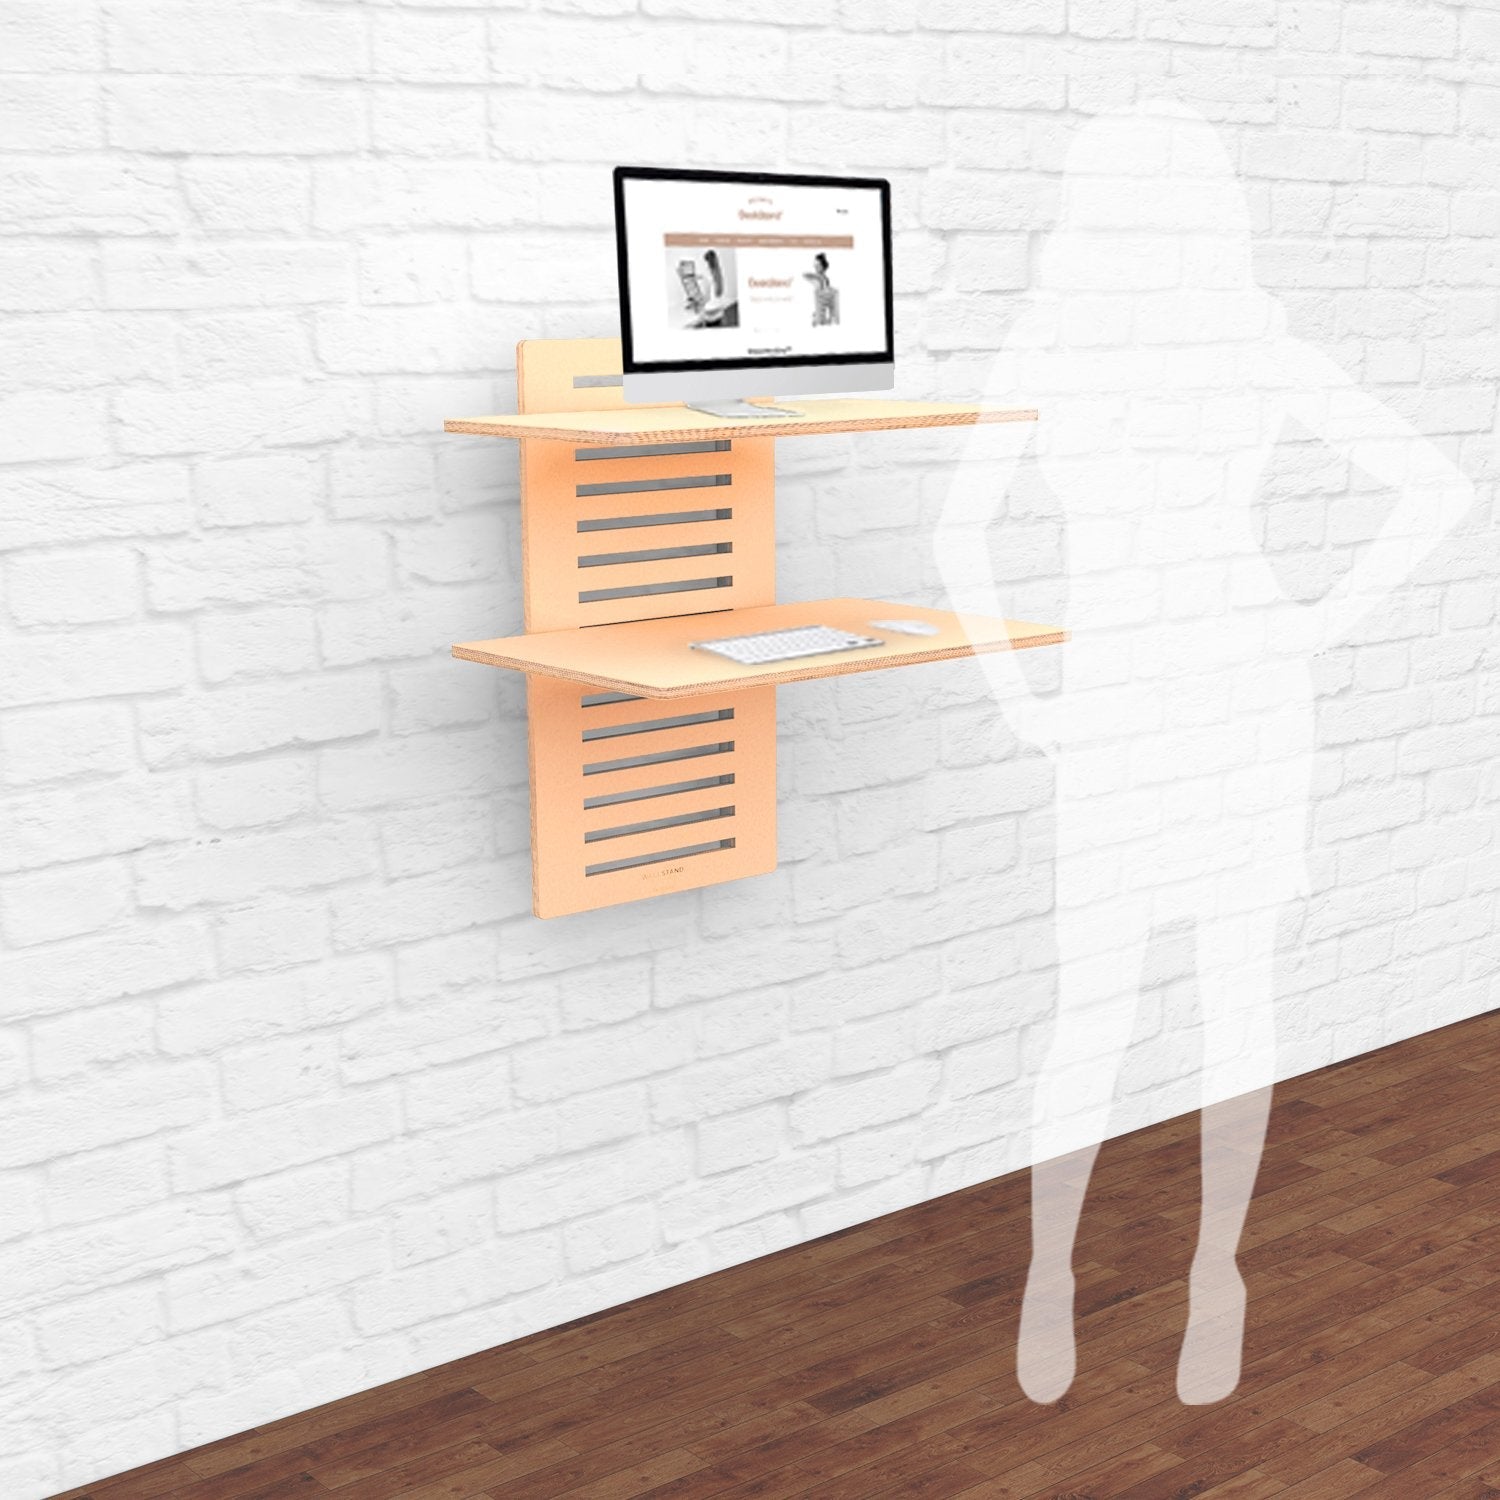 WallStand - Adjustable Wall-mounted Standing Desk - home • office • health